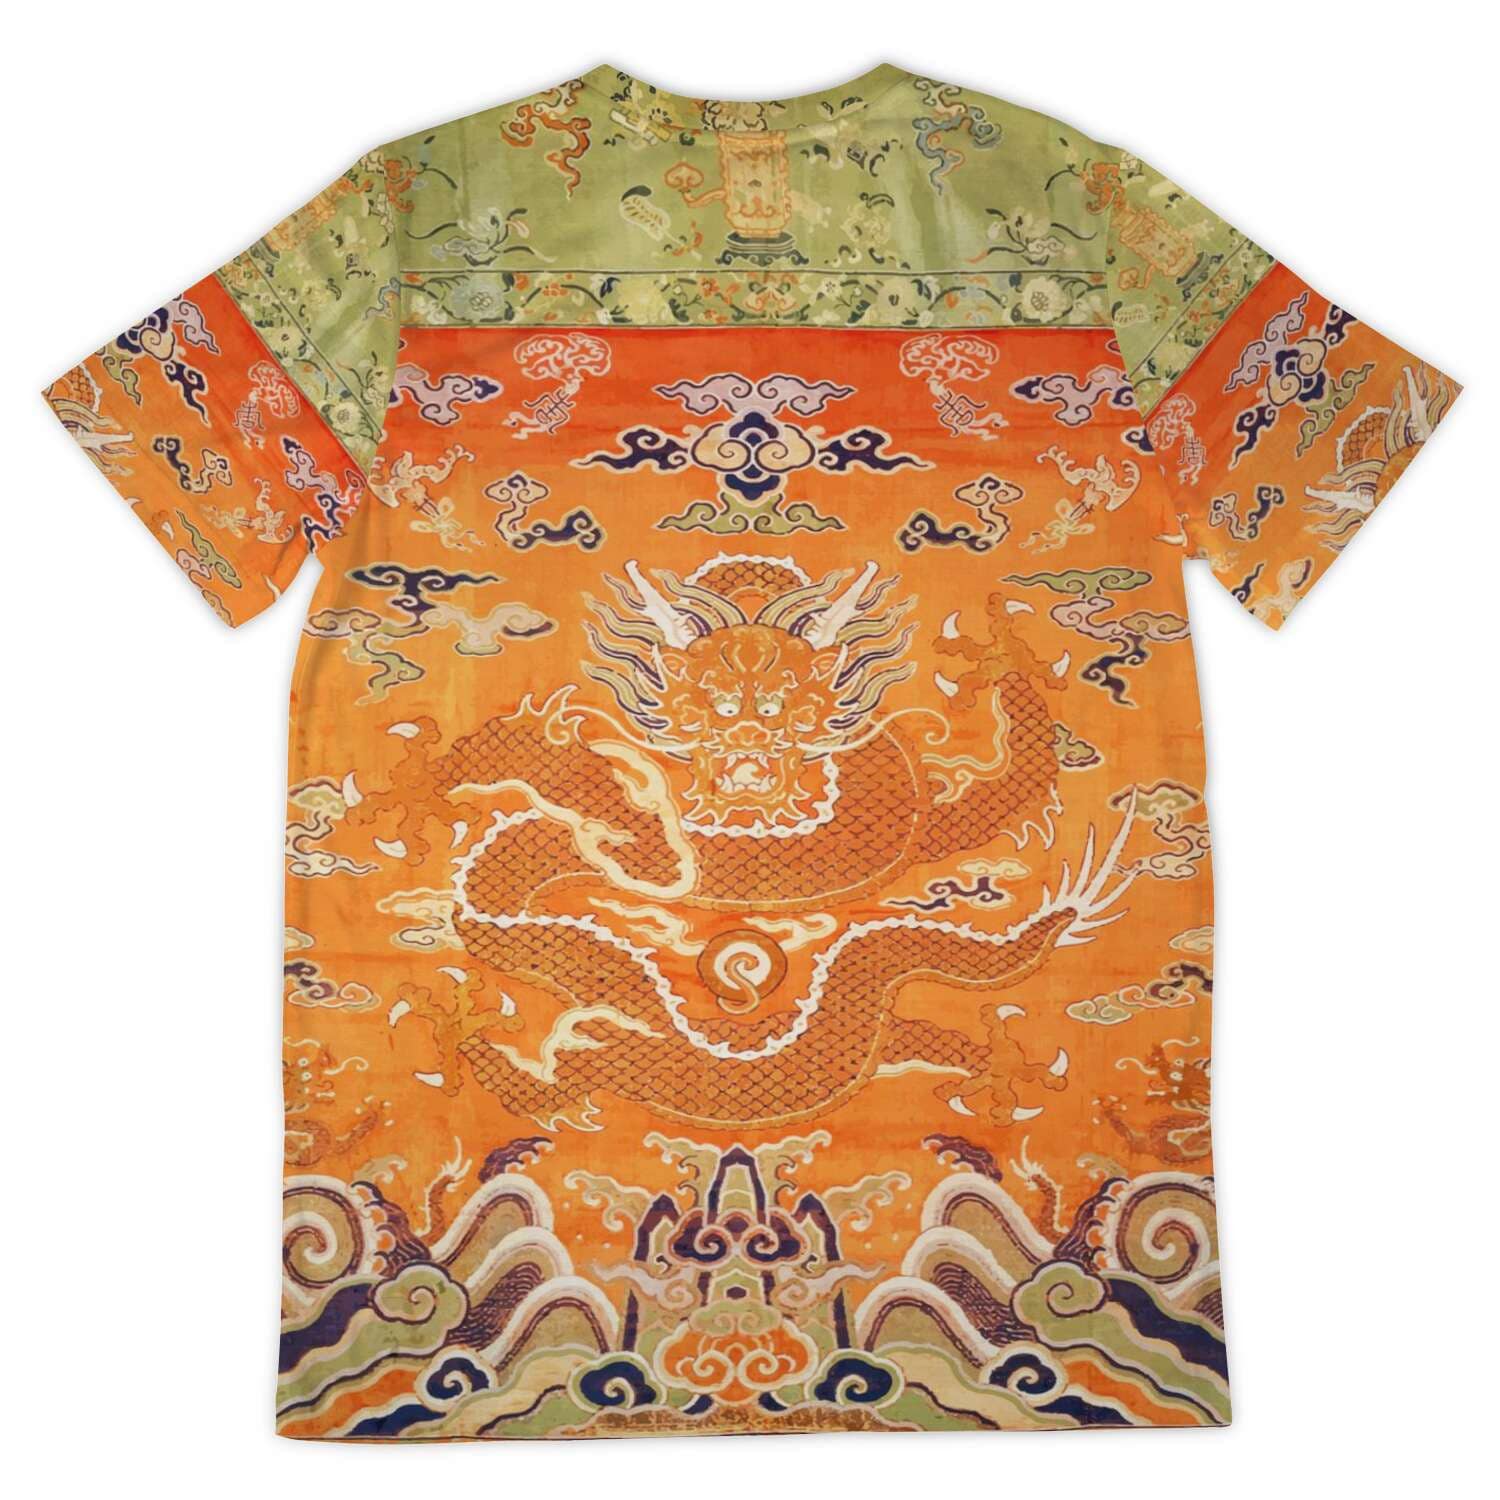 AOP T-Shirt Ming Dynasty East Asian Chinese Taoist Dragon Serpent Mystical Antique Vintage Graphic Art All-Over-Print T-Shirt